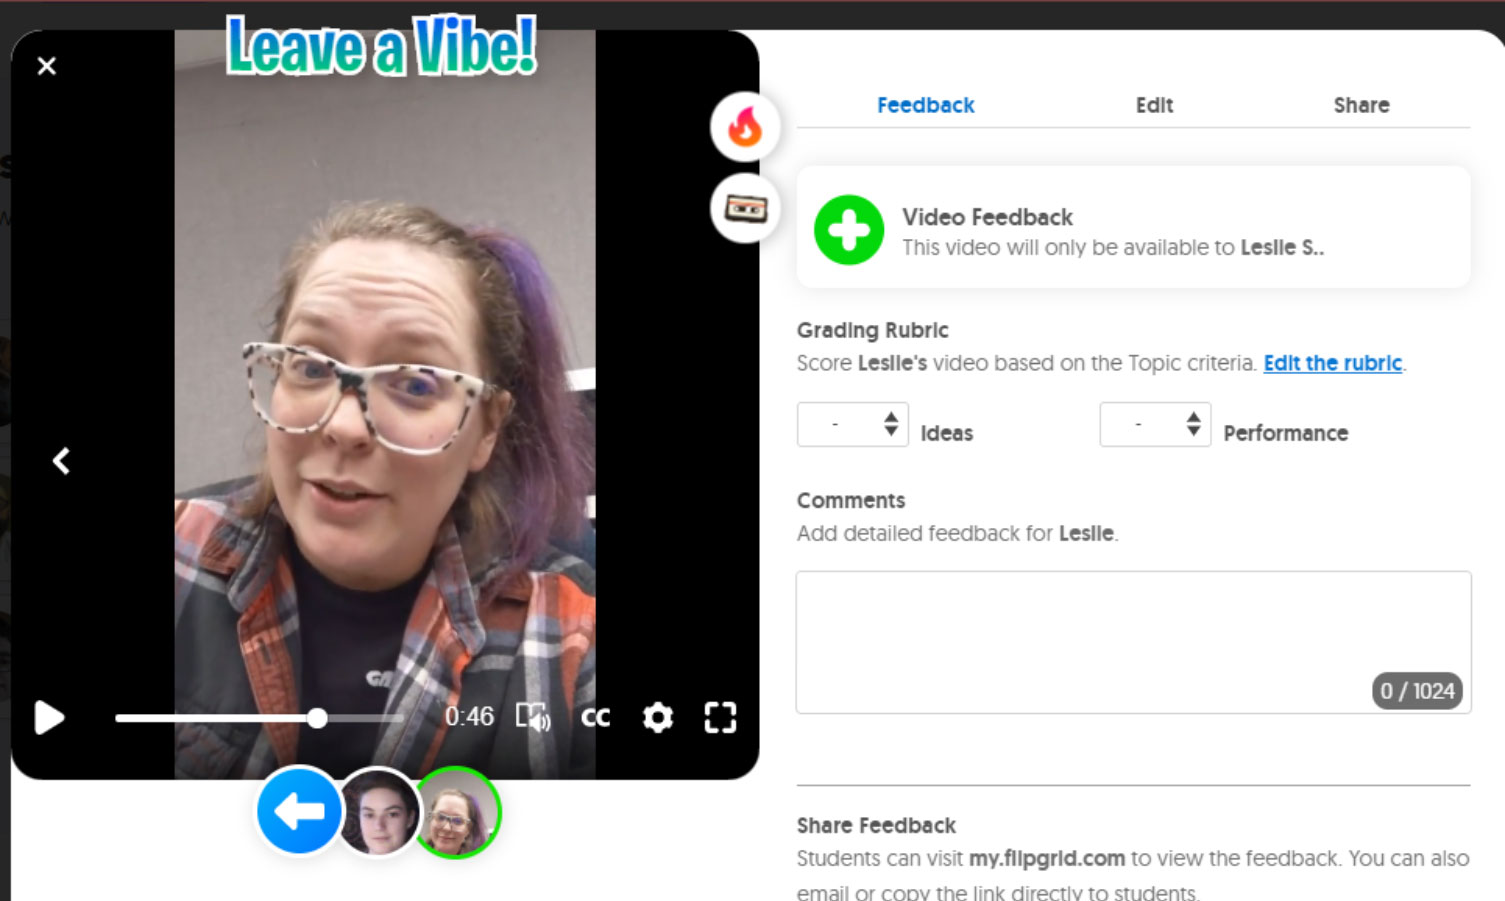 A woman in glasses in a video on the left. "Leave a vibe!" is above her head. On the right, feedback panel is open for others to leave comments.